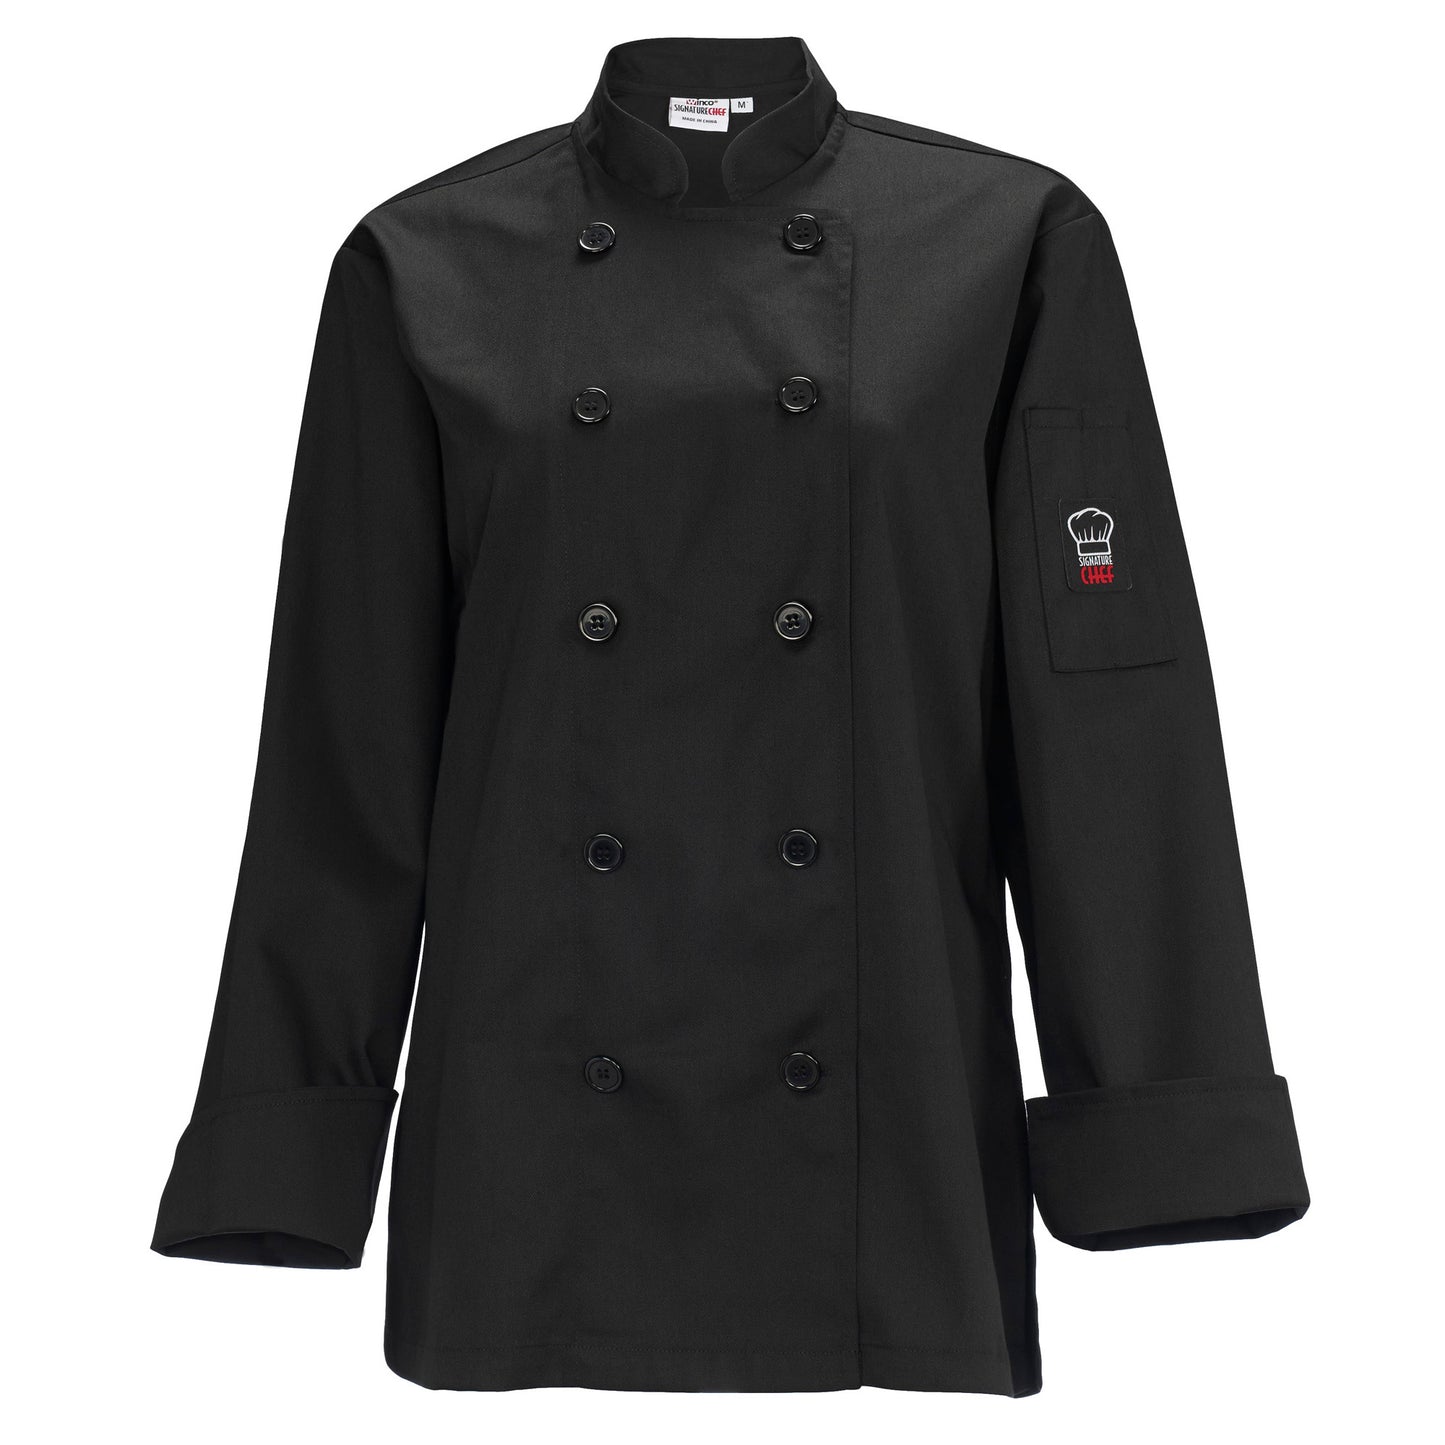 UNF-7KM - Women's Tapered Fit Chef Jacket